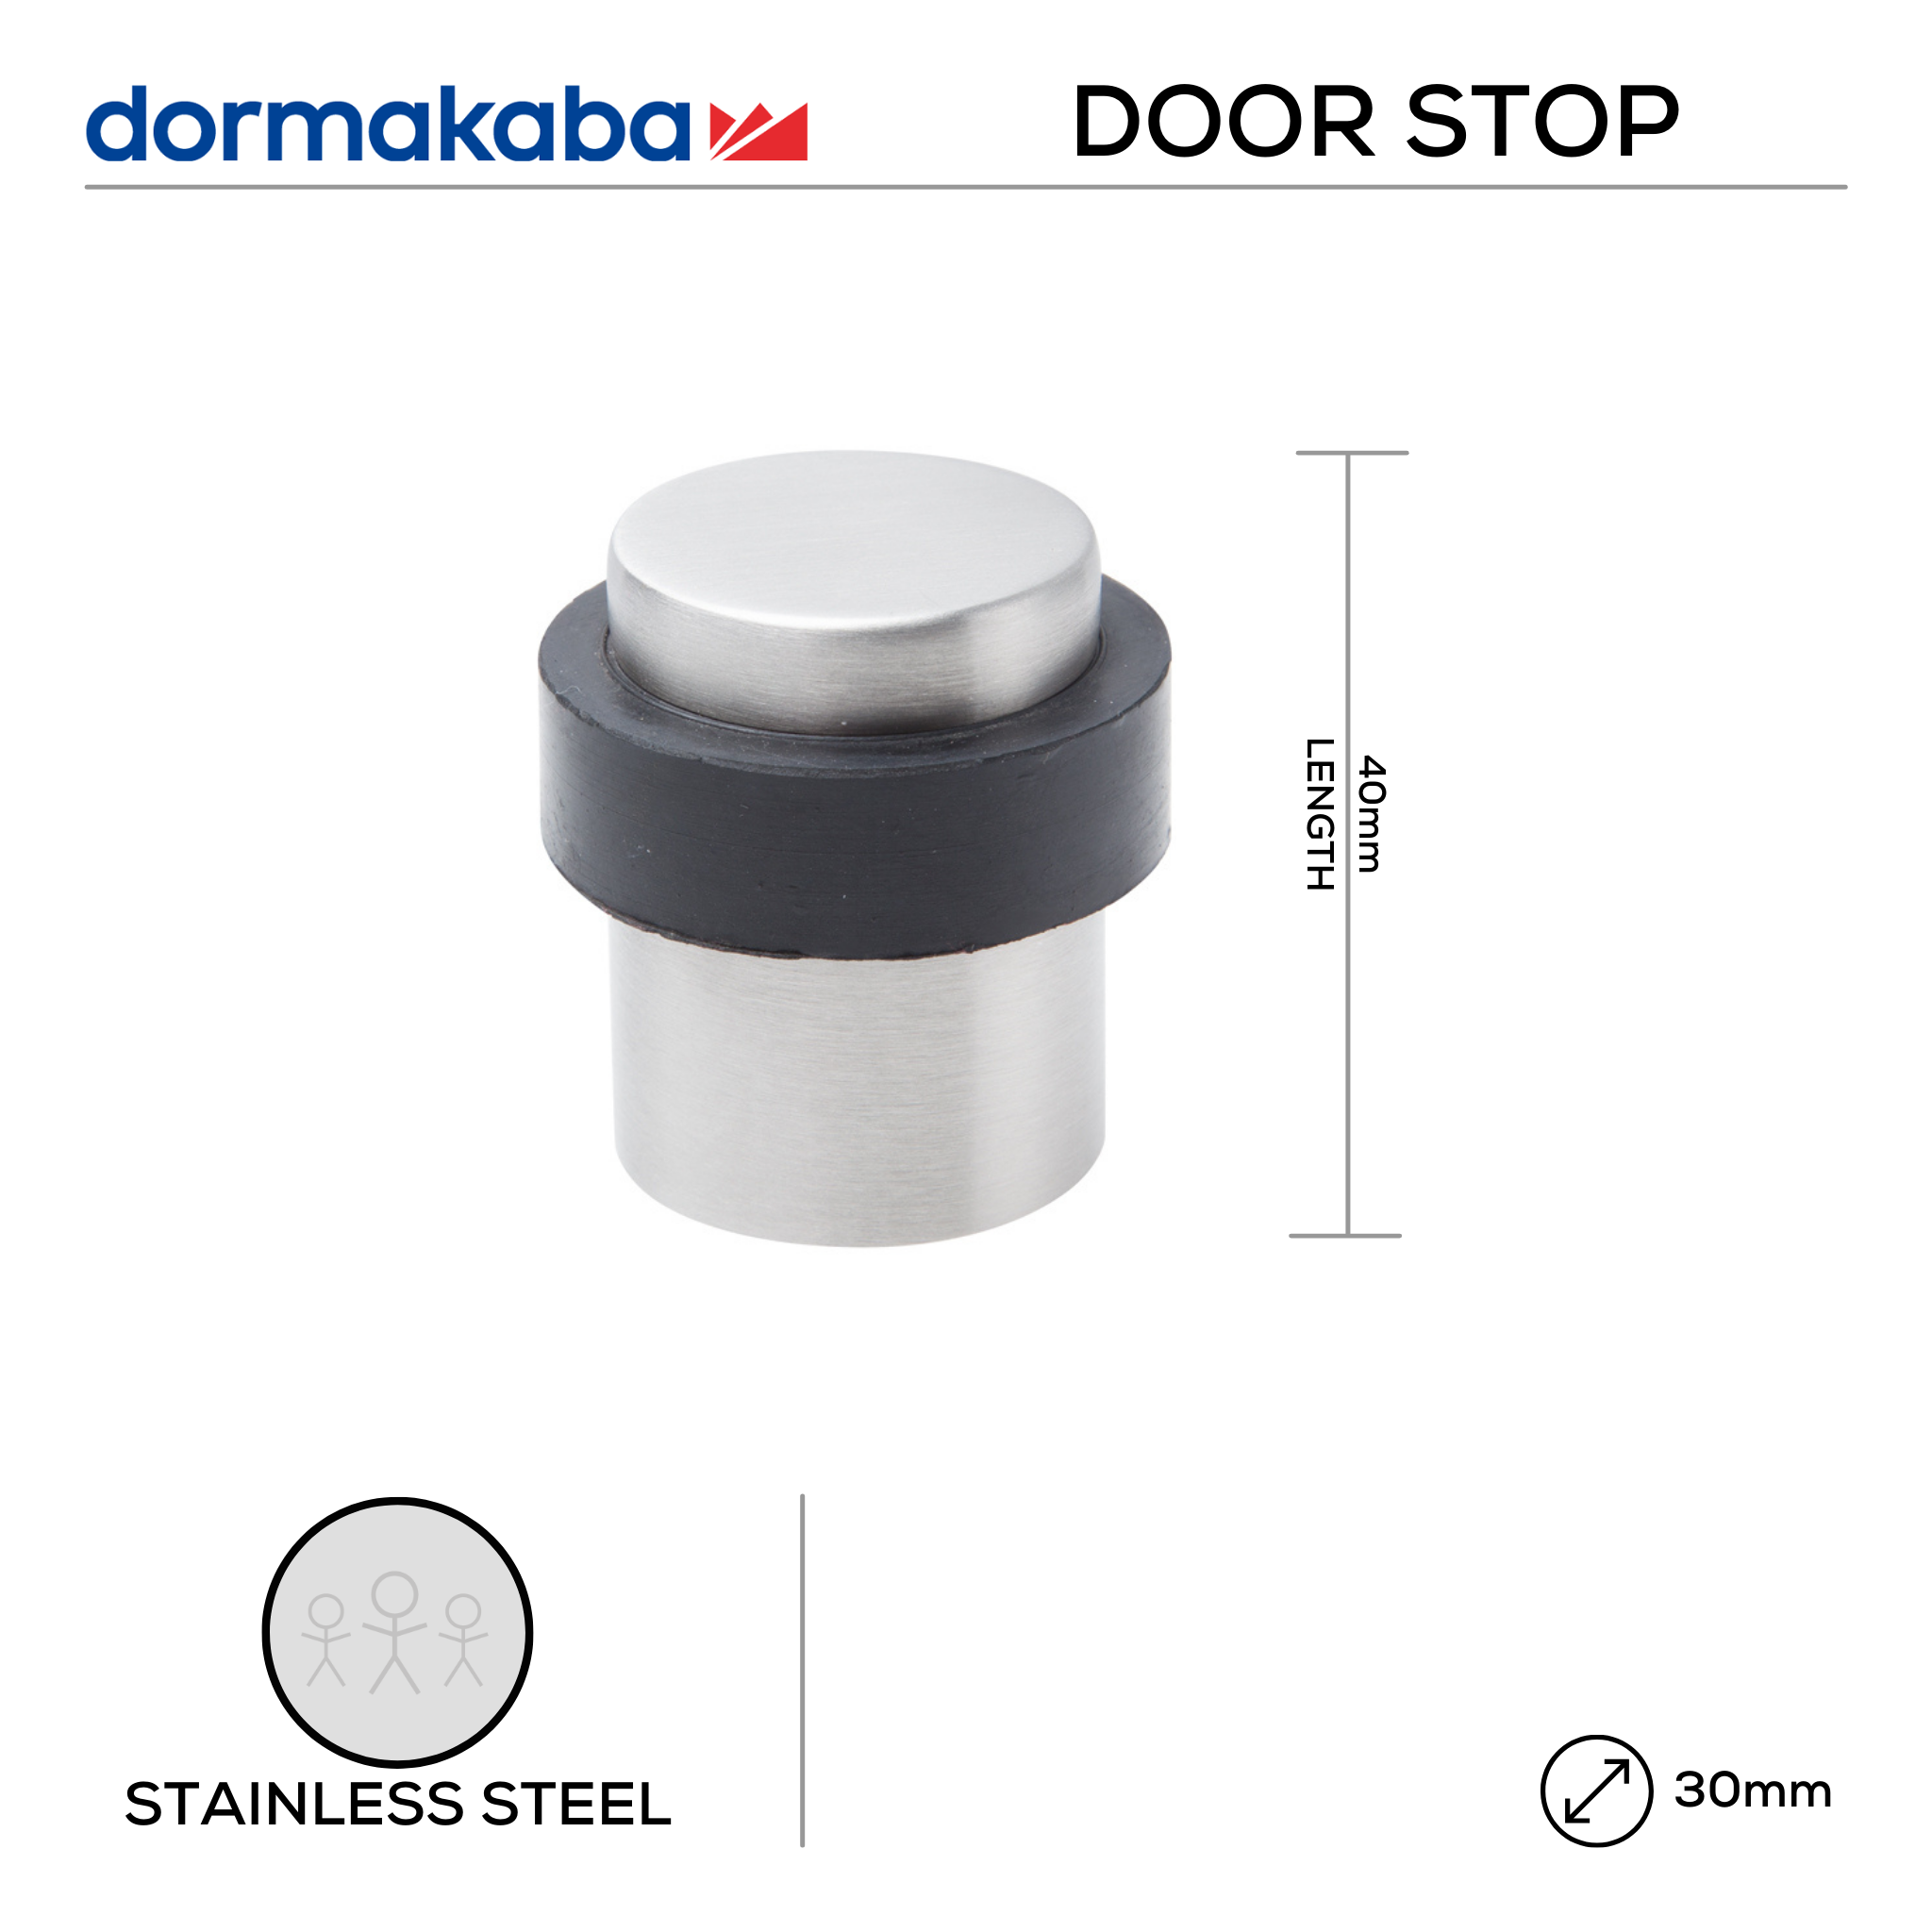 DDS-SS-021, Door Stop, Floor Mounted, Cylindical, 40mm (l) x 30mm (Ø) x 38mm (t), Stainless Steel, DORMAKABA